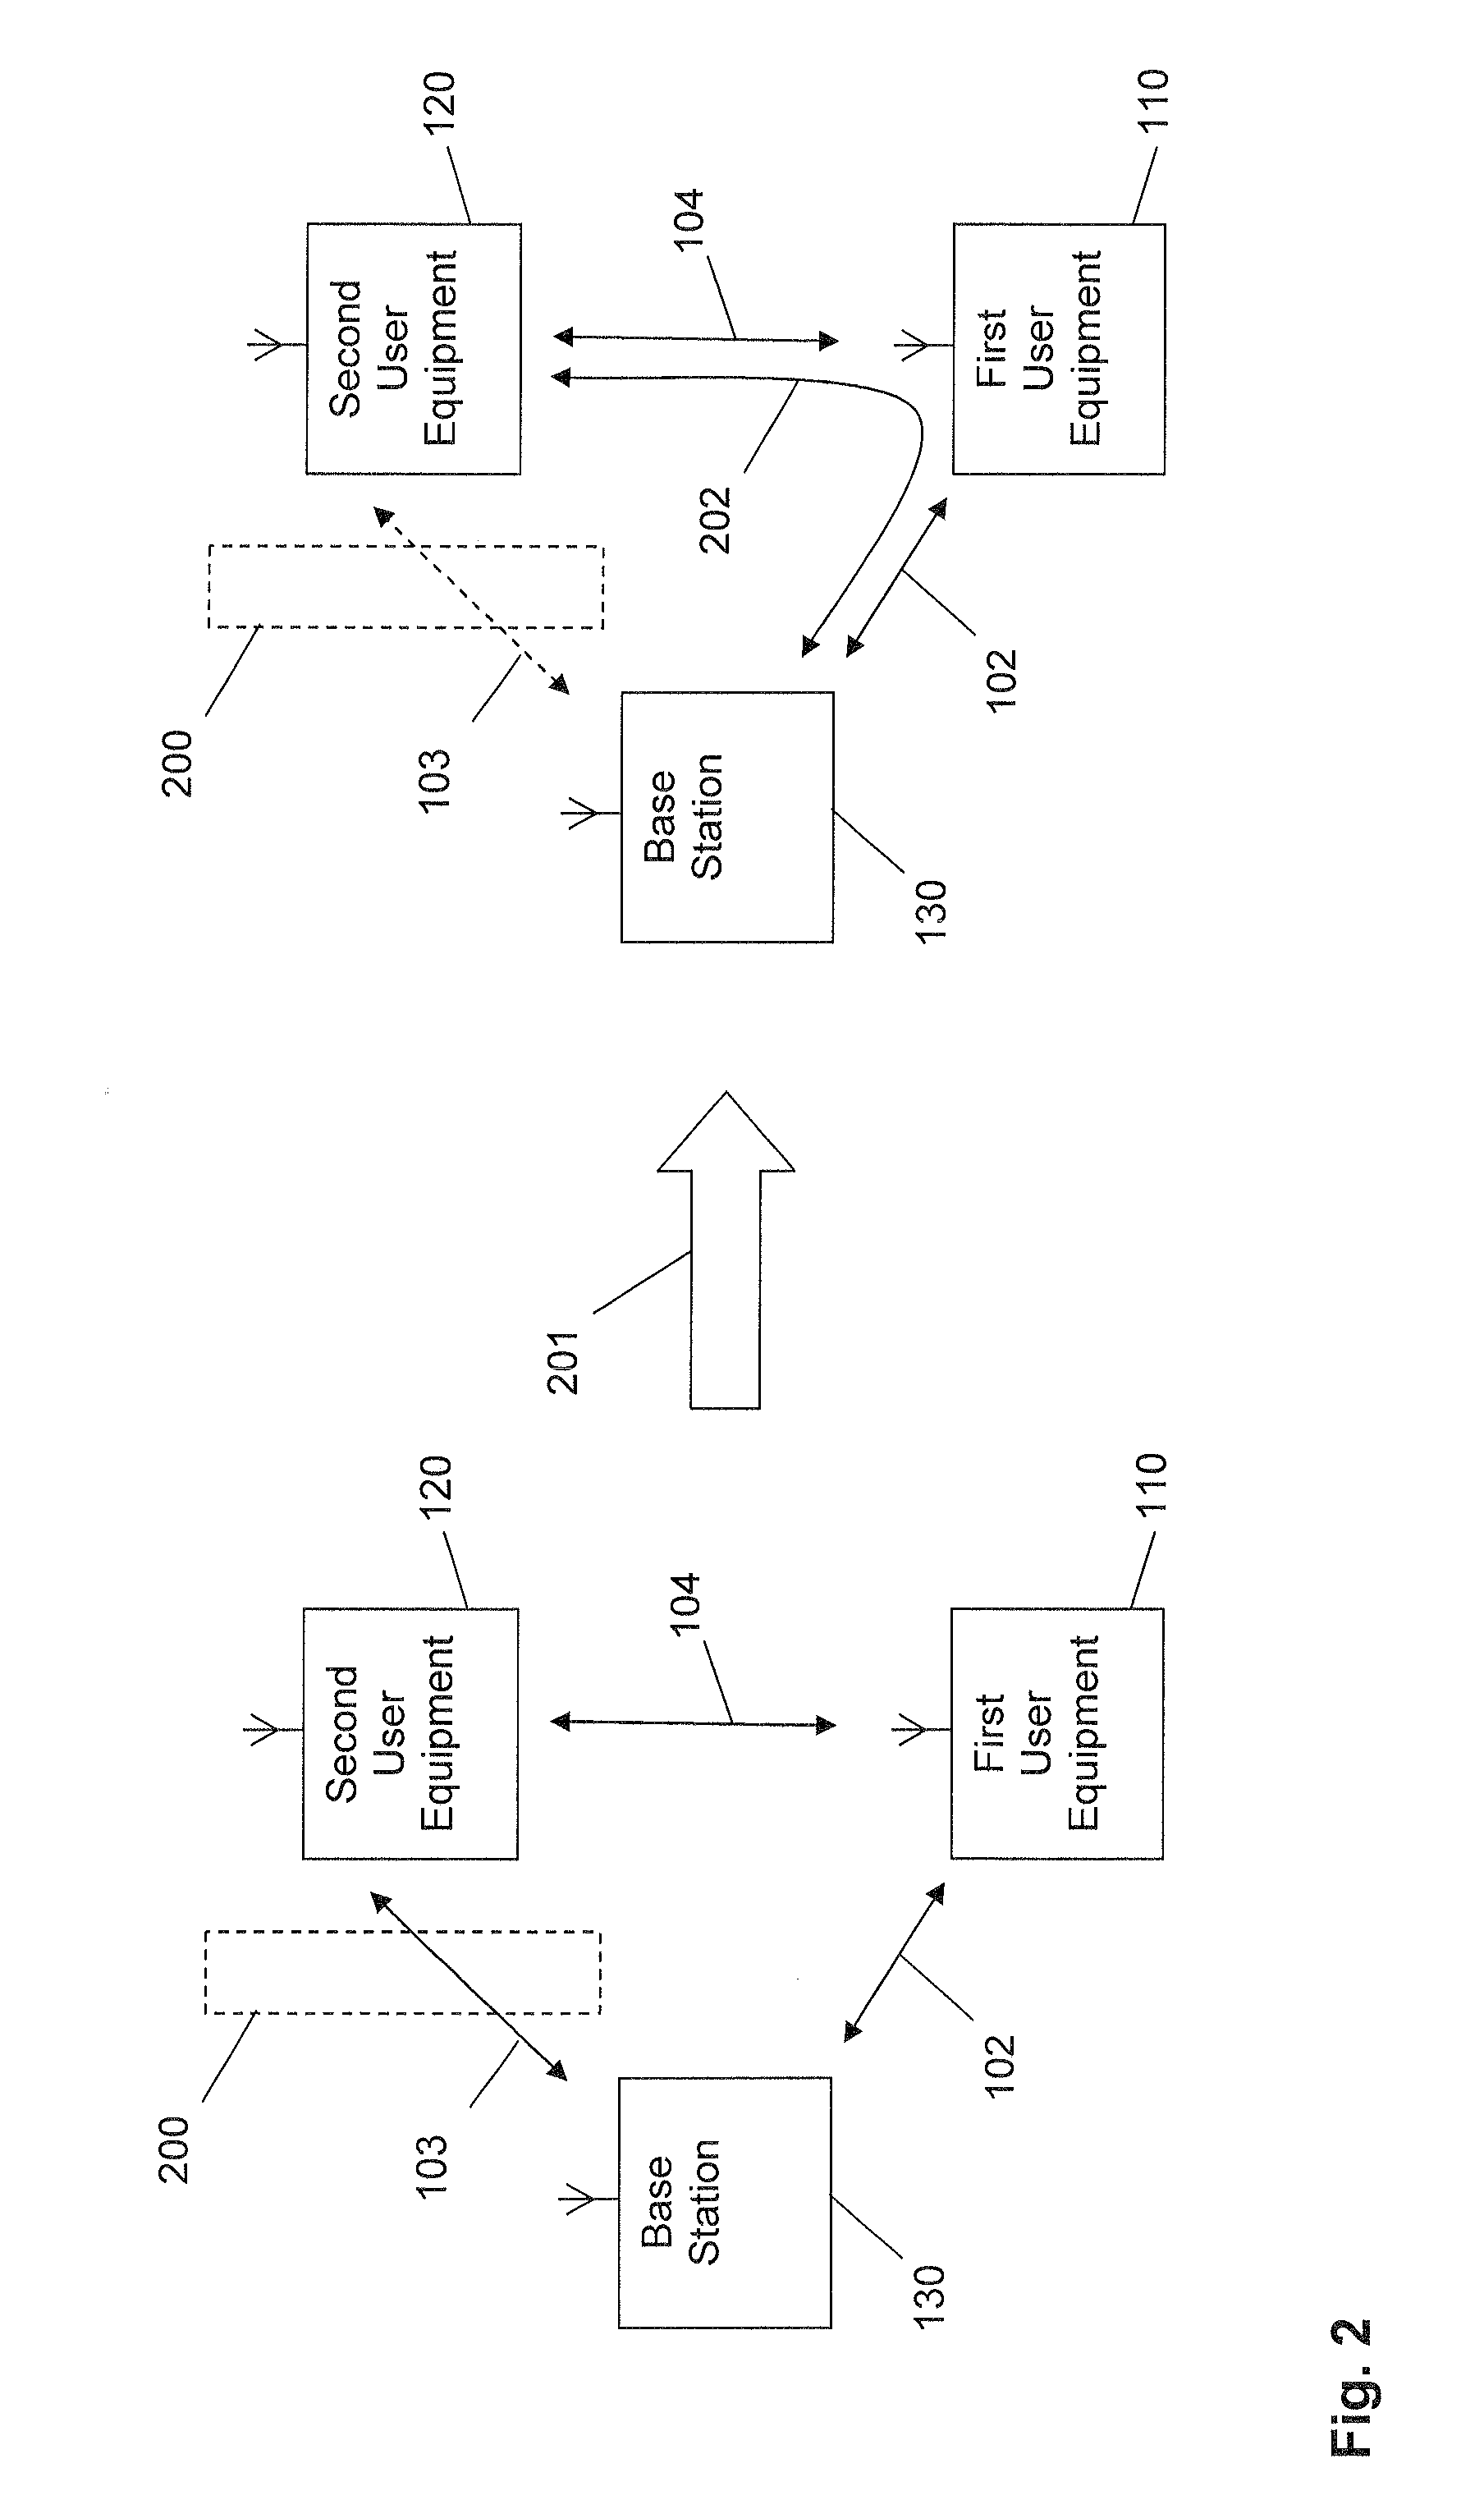 Operating a base station of a radio access network